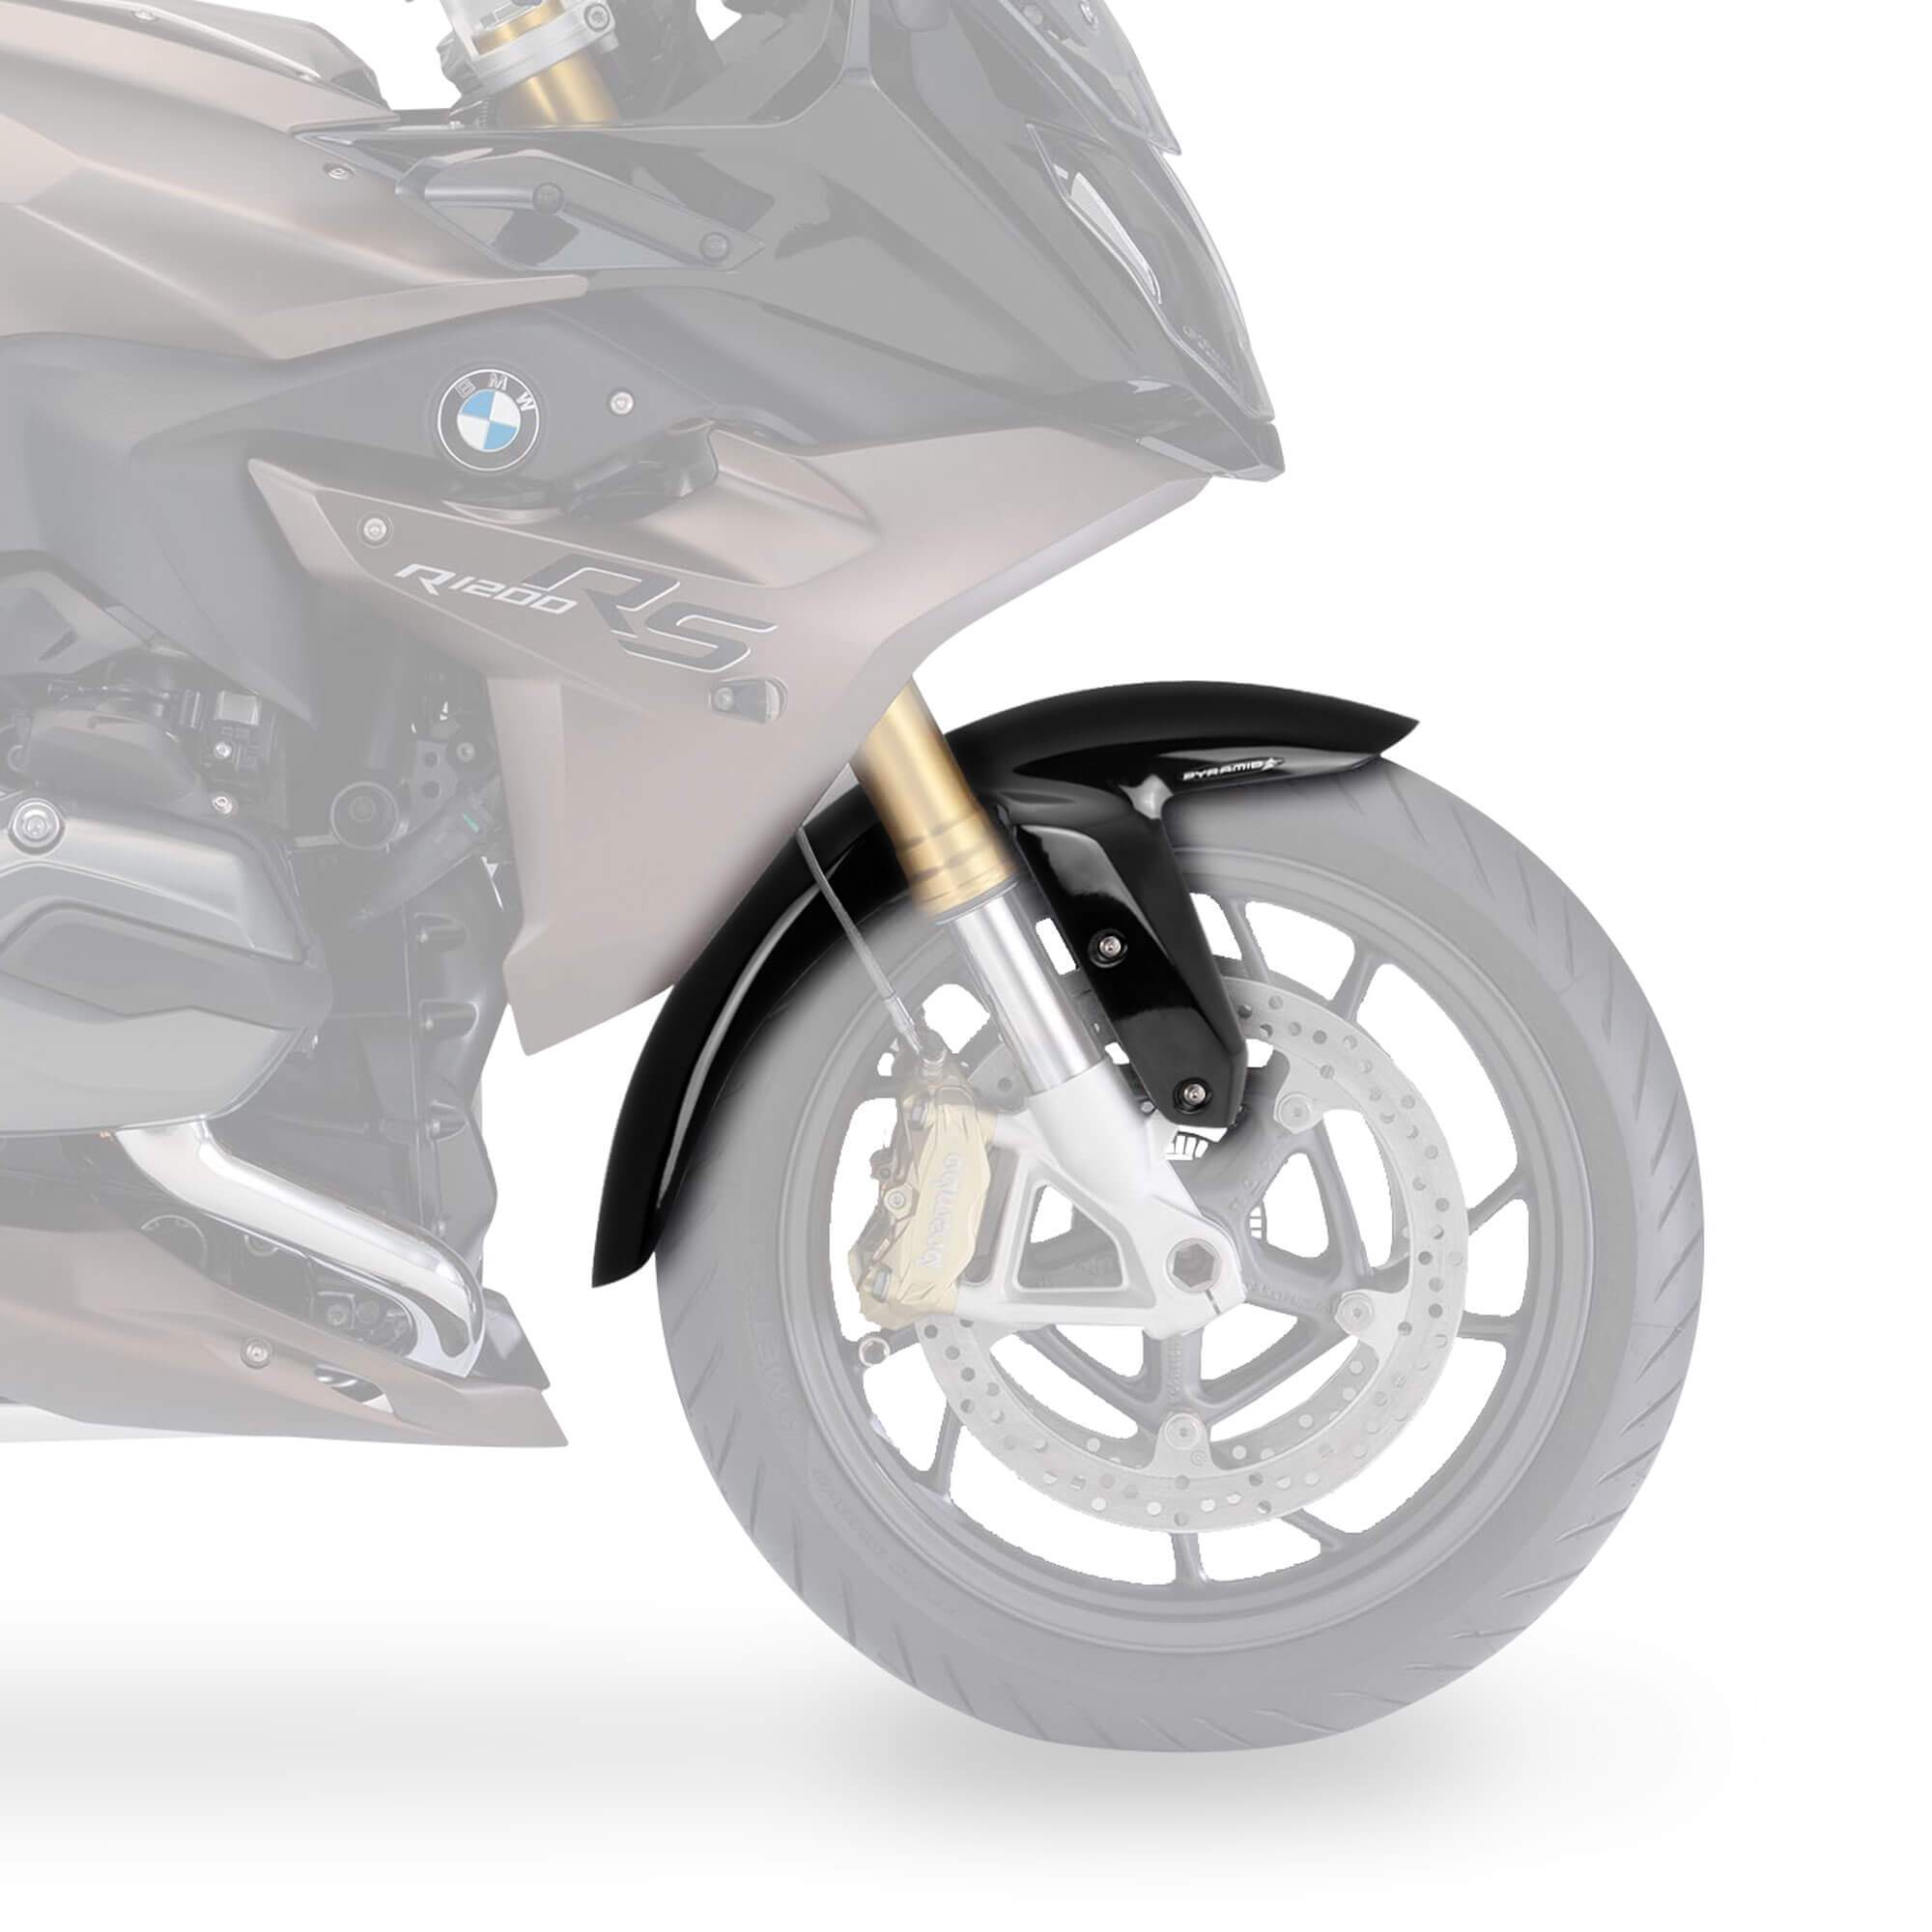 Pyramid Extended Front Guard | Gloss Black | BMW R1200 R 2016>Current-294001B-Front Guards-Pyramid Motorcycle Accessories